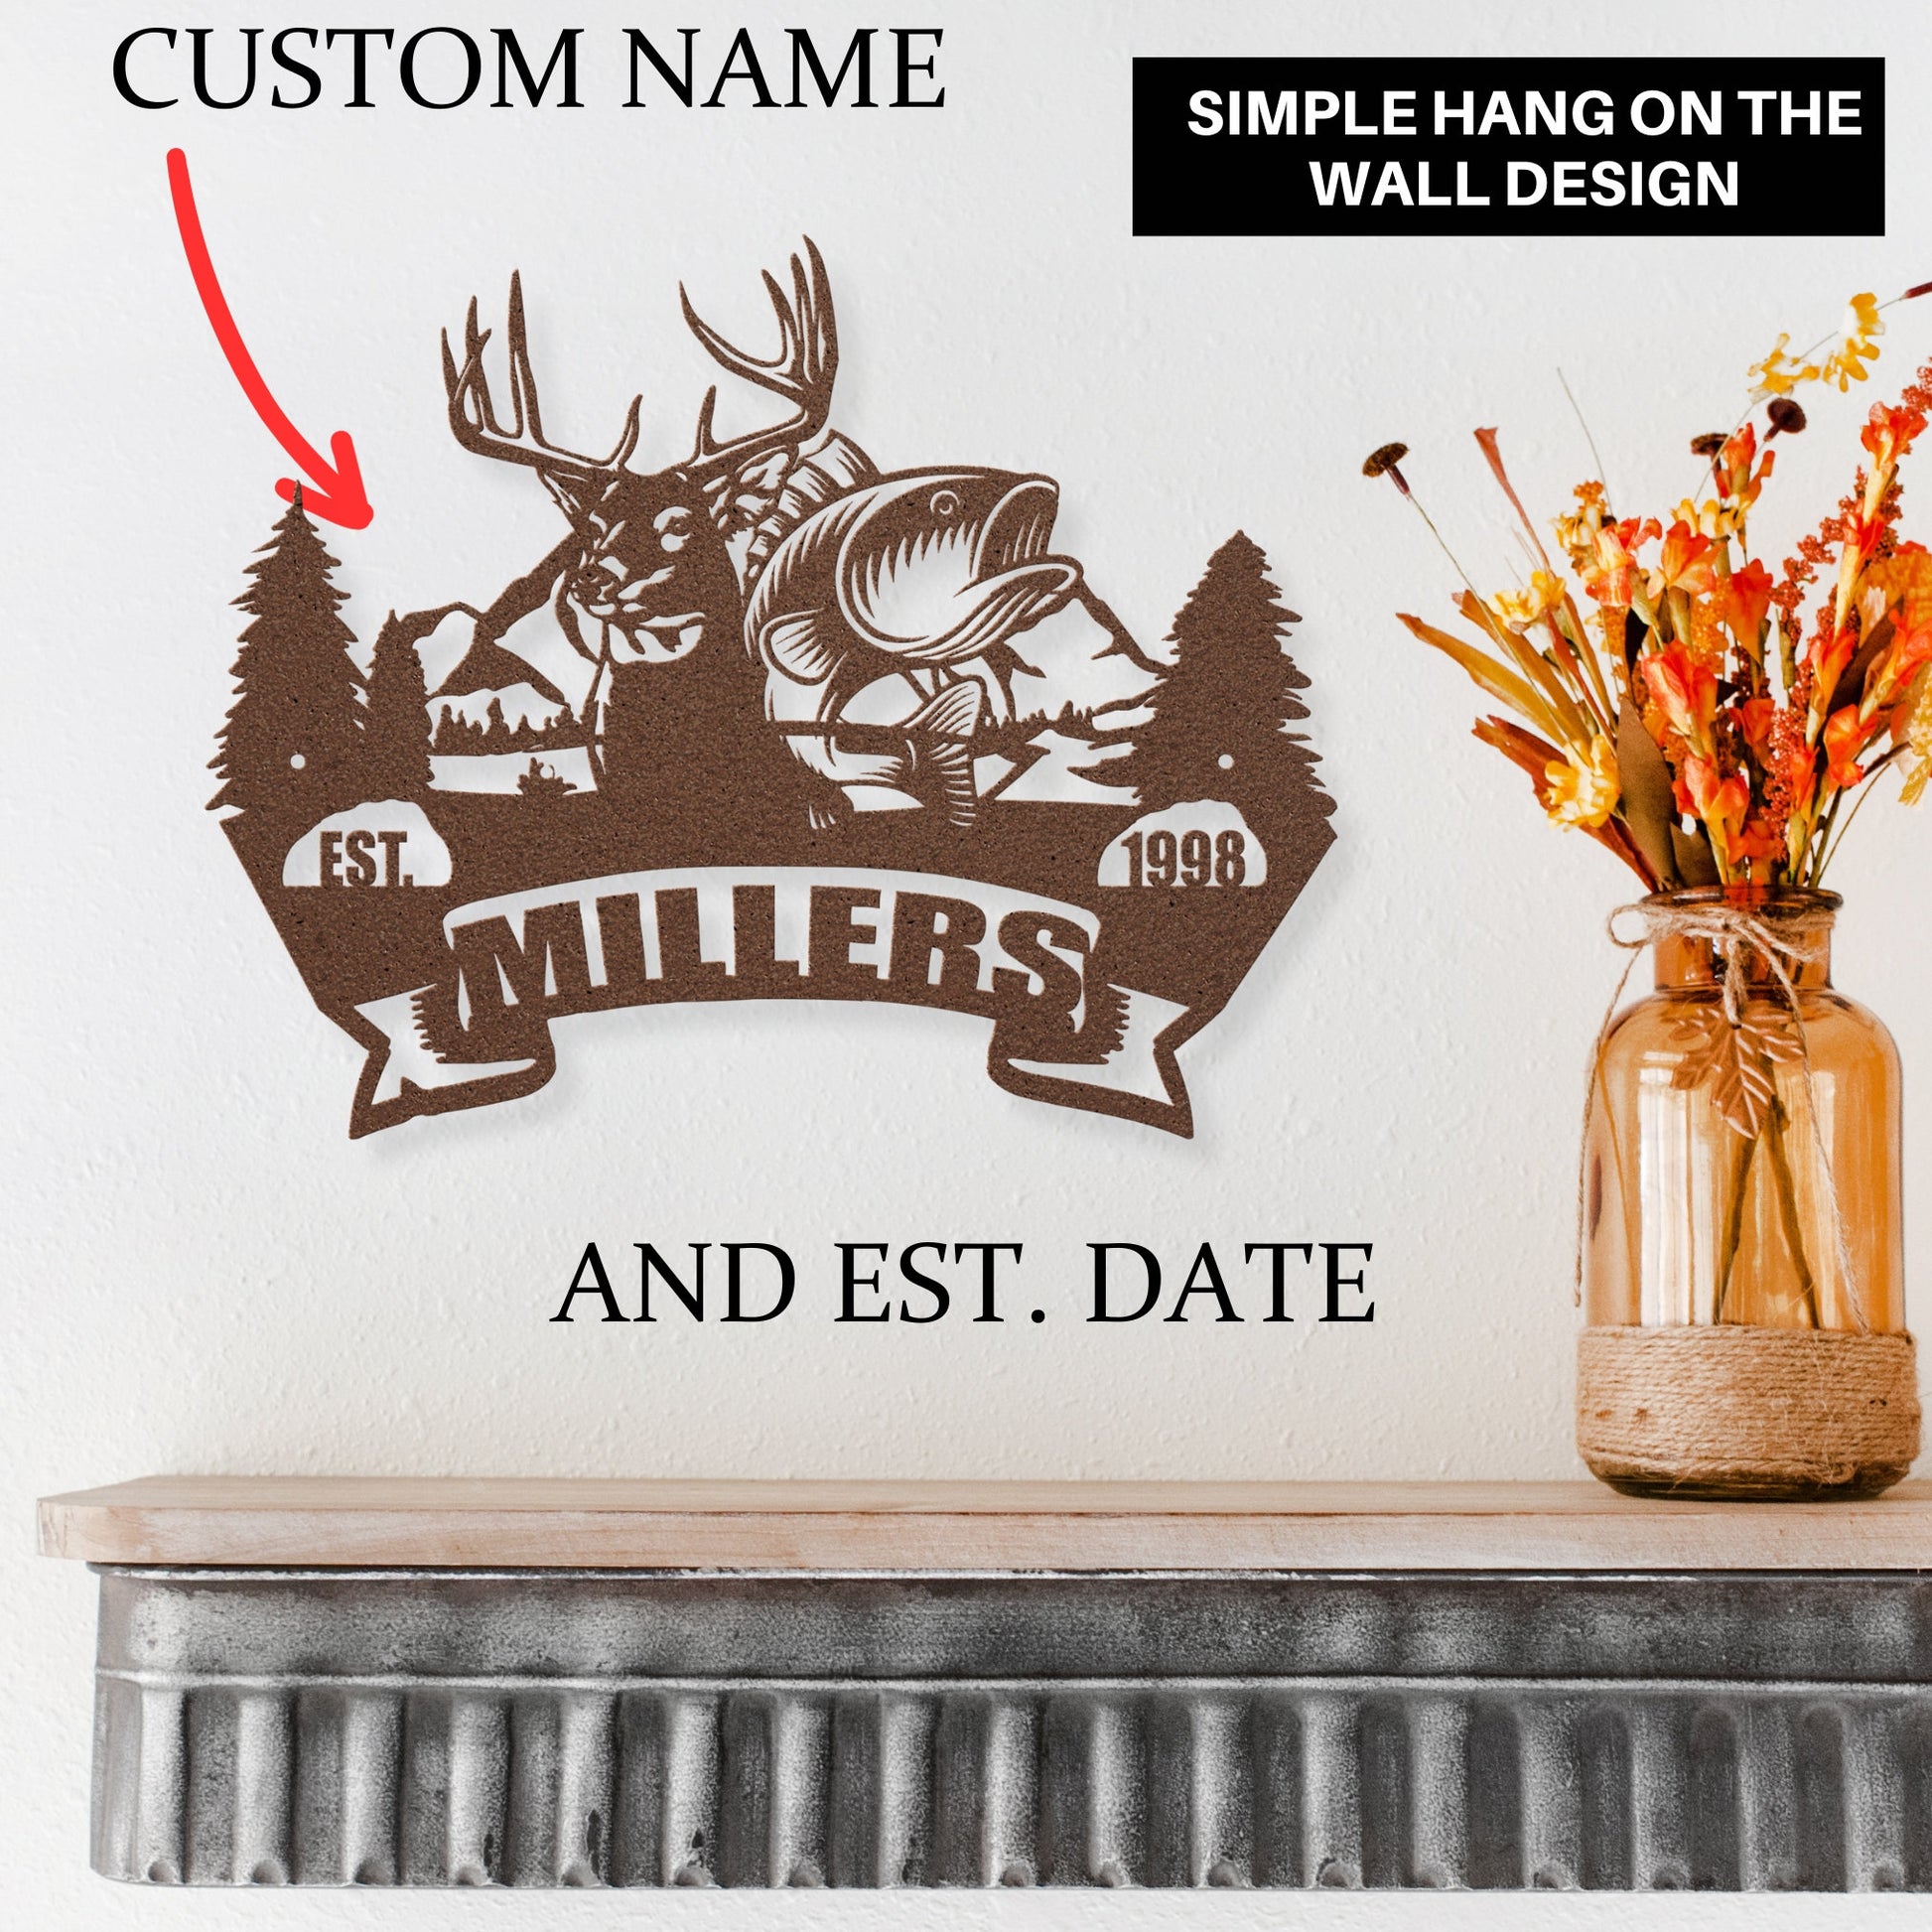 Personalized Metal Sign Deer Fish | Gift for Dad | Hunting Cabin Metal Outdoor Wall Decor | Metal Deer Sign with Last Name Established Date